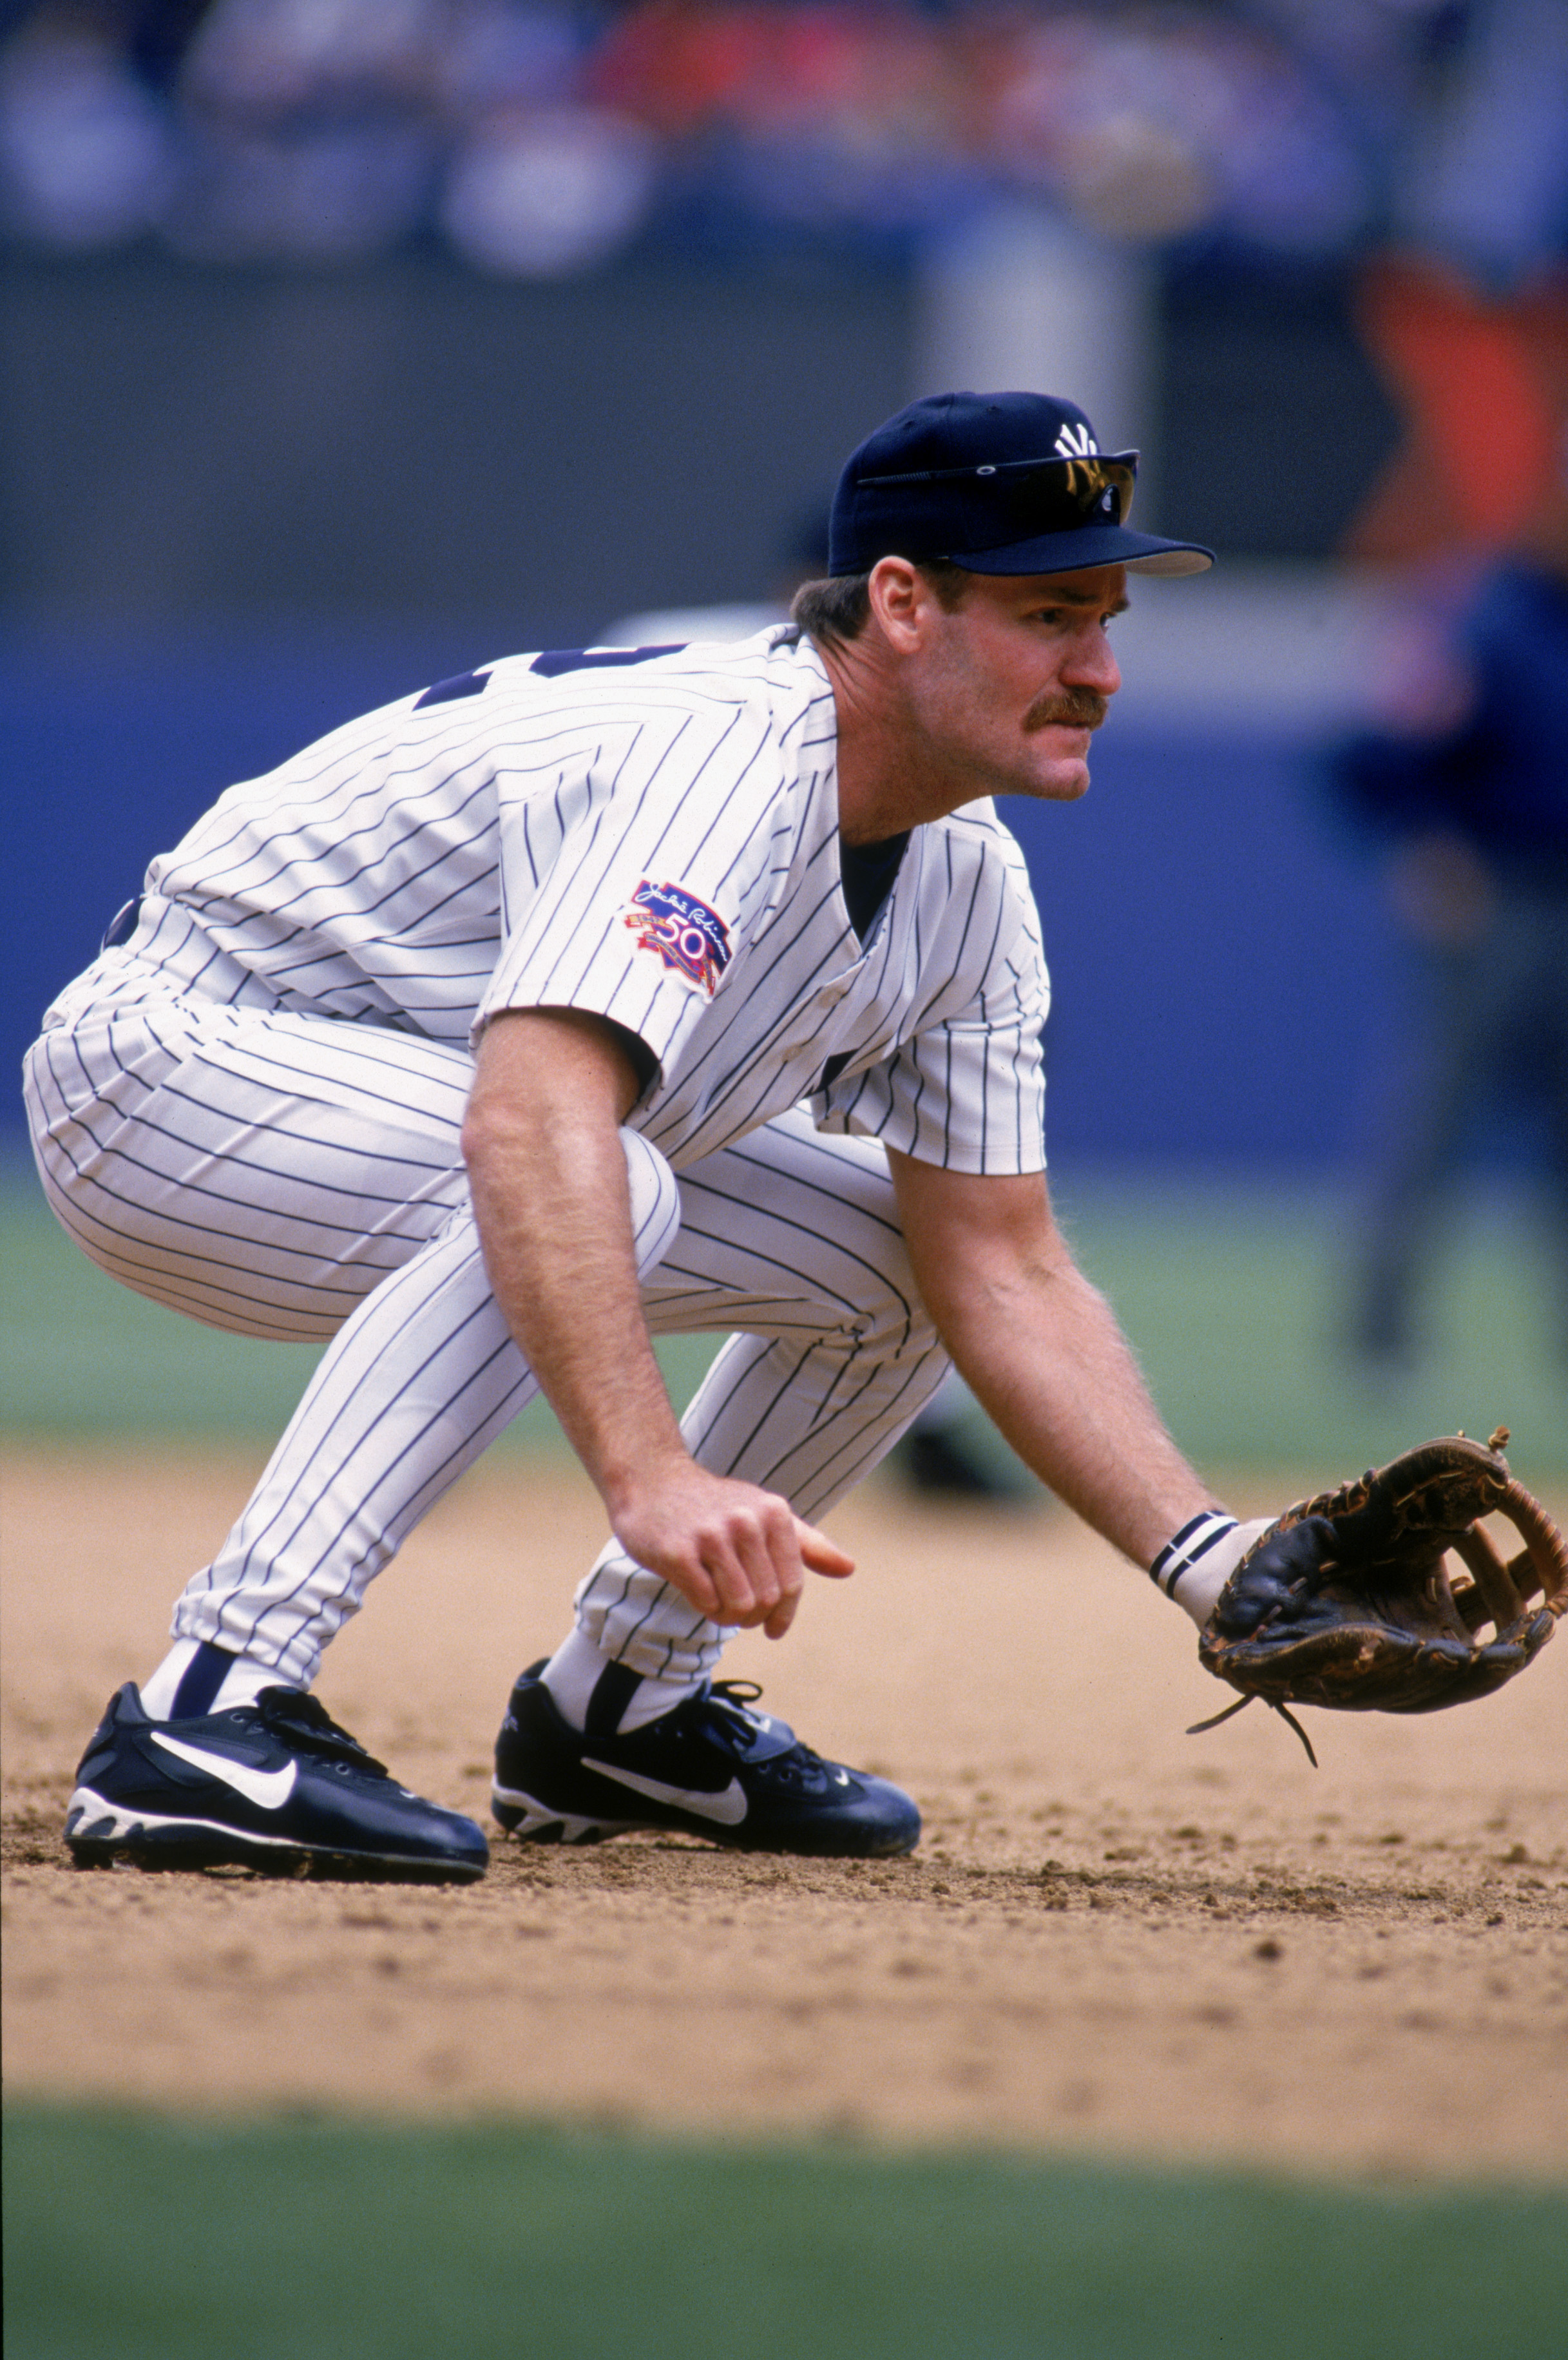 BRONX - MAY 22:  Wade Boggs #12 of the New York Yankees plays defense against Boston Red Sox during the game at Yankee Stadium in the Bronx, New York, on May 22, 1997.  The Re Sox won 8-2. (Photo by Bernie Nunez/Getty Images)